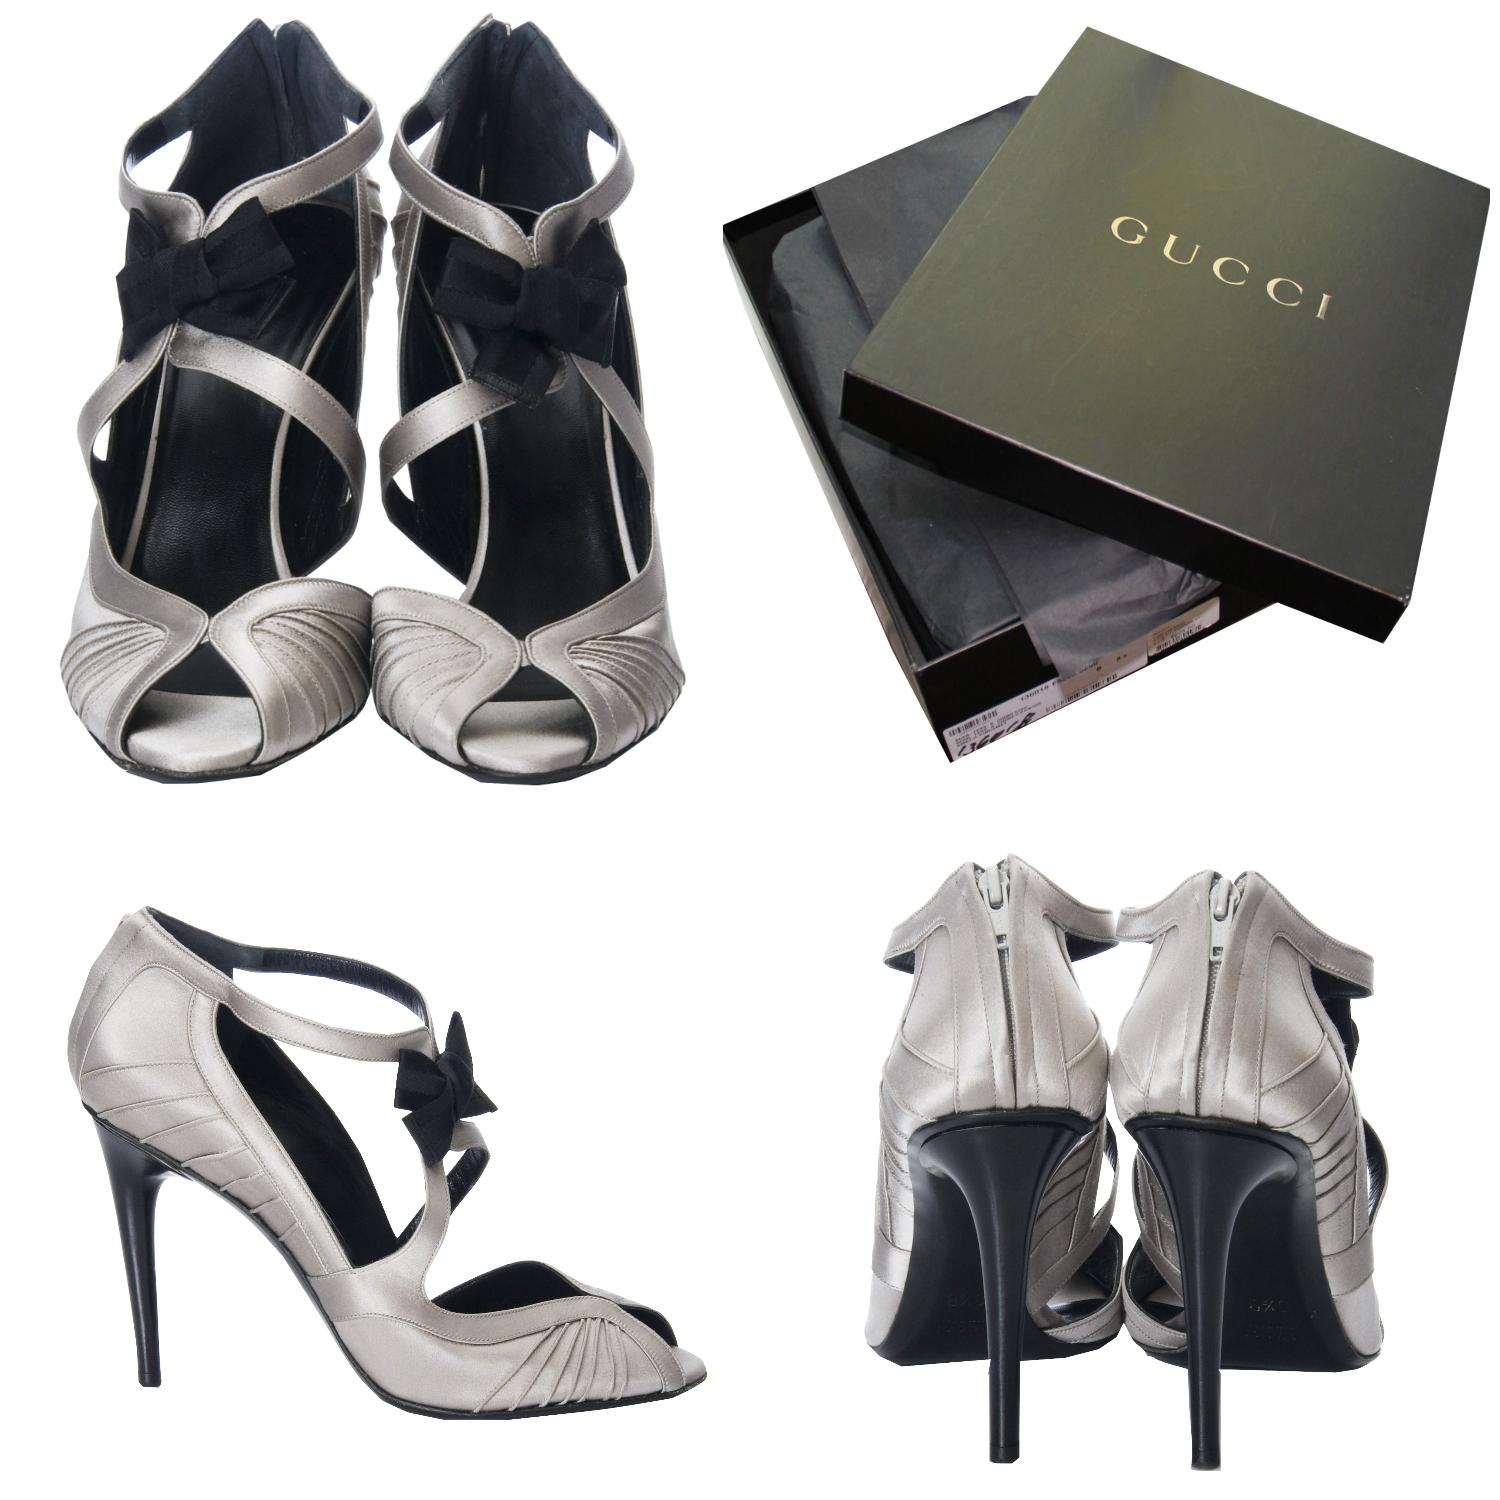 Tom Ford For Gucci Heels
Brand New
As Seen on Sarah Jessica Parker
* Stunning in Silver Satin
* Tom Ford for Gucci
* Size: 10
* Black Satin Bow at Front
* Leather Insole 
* Zips up the Back 
* 4